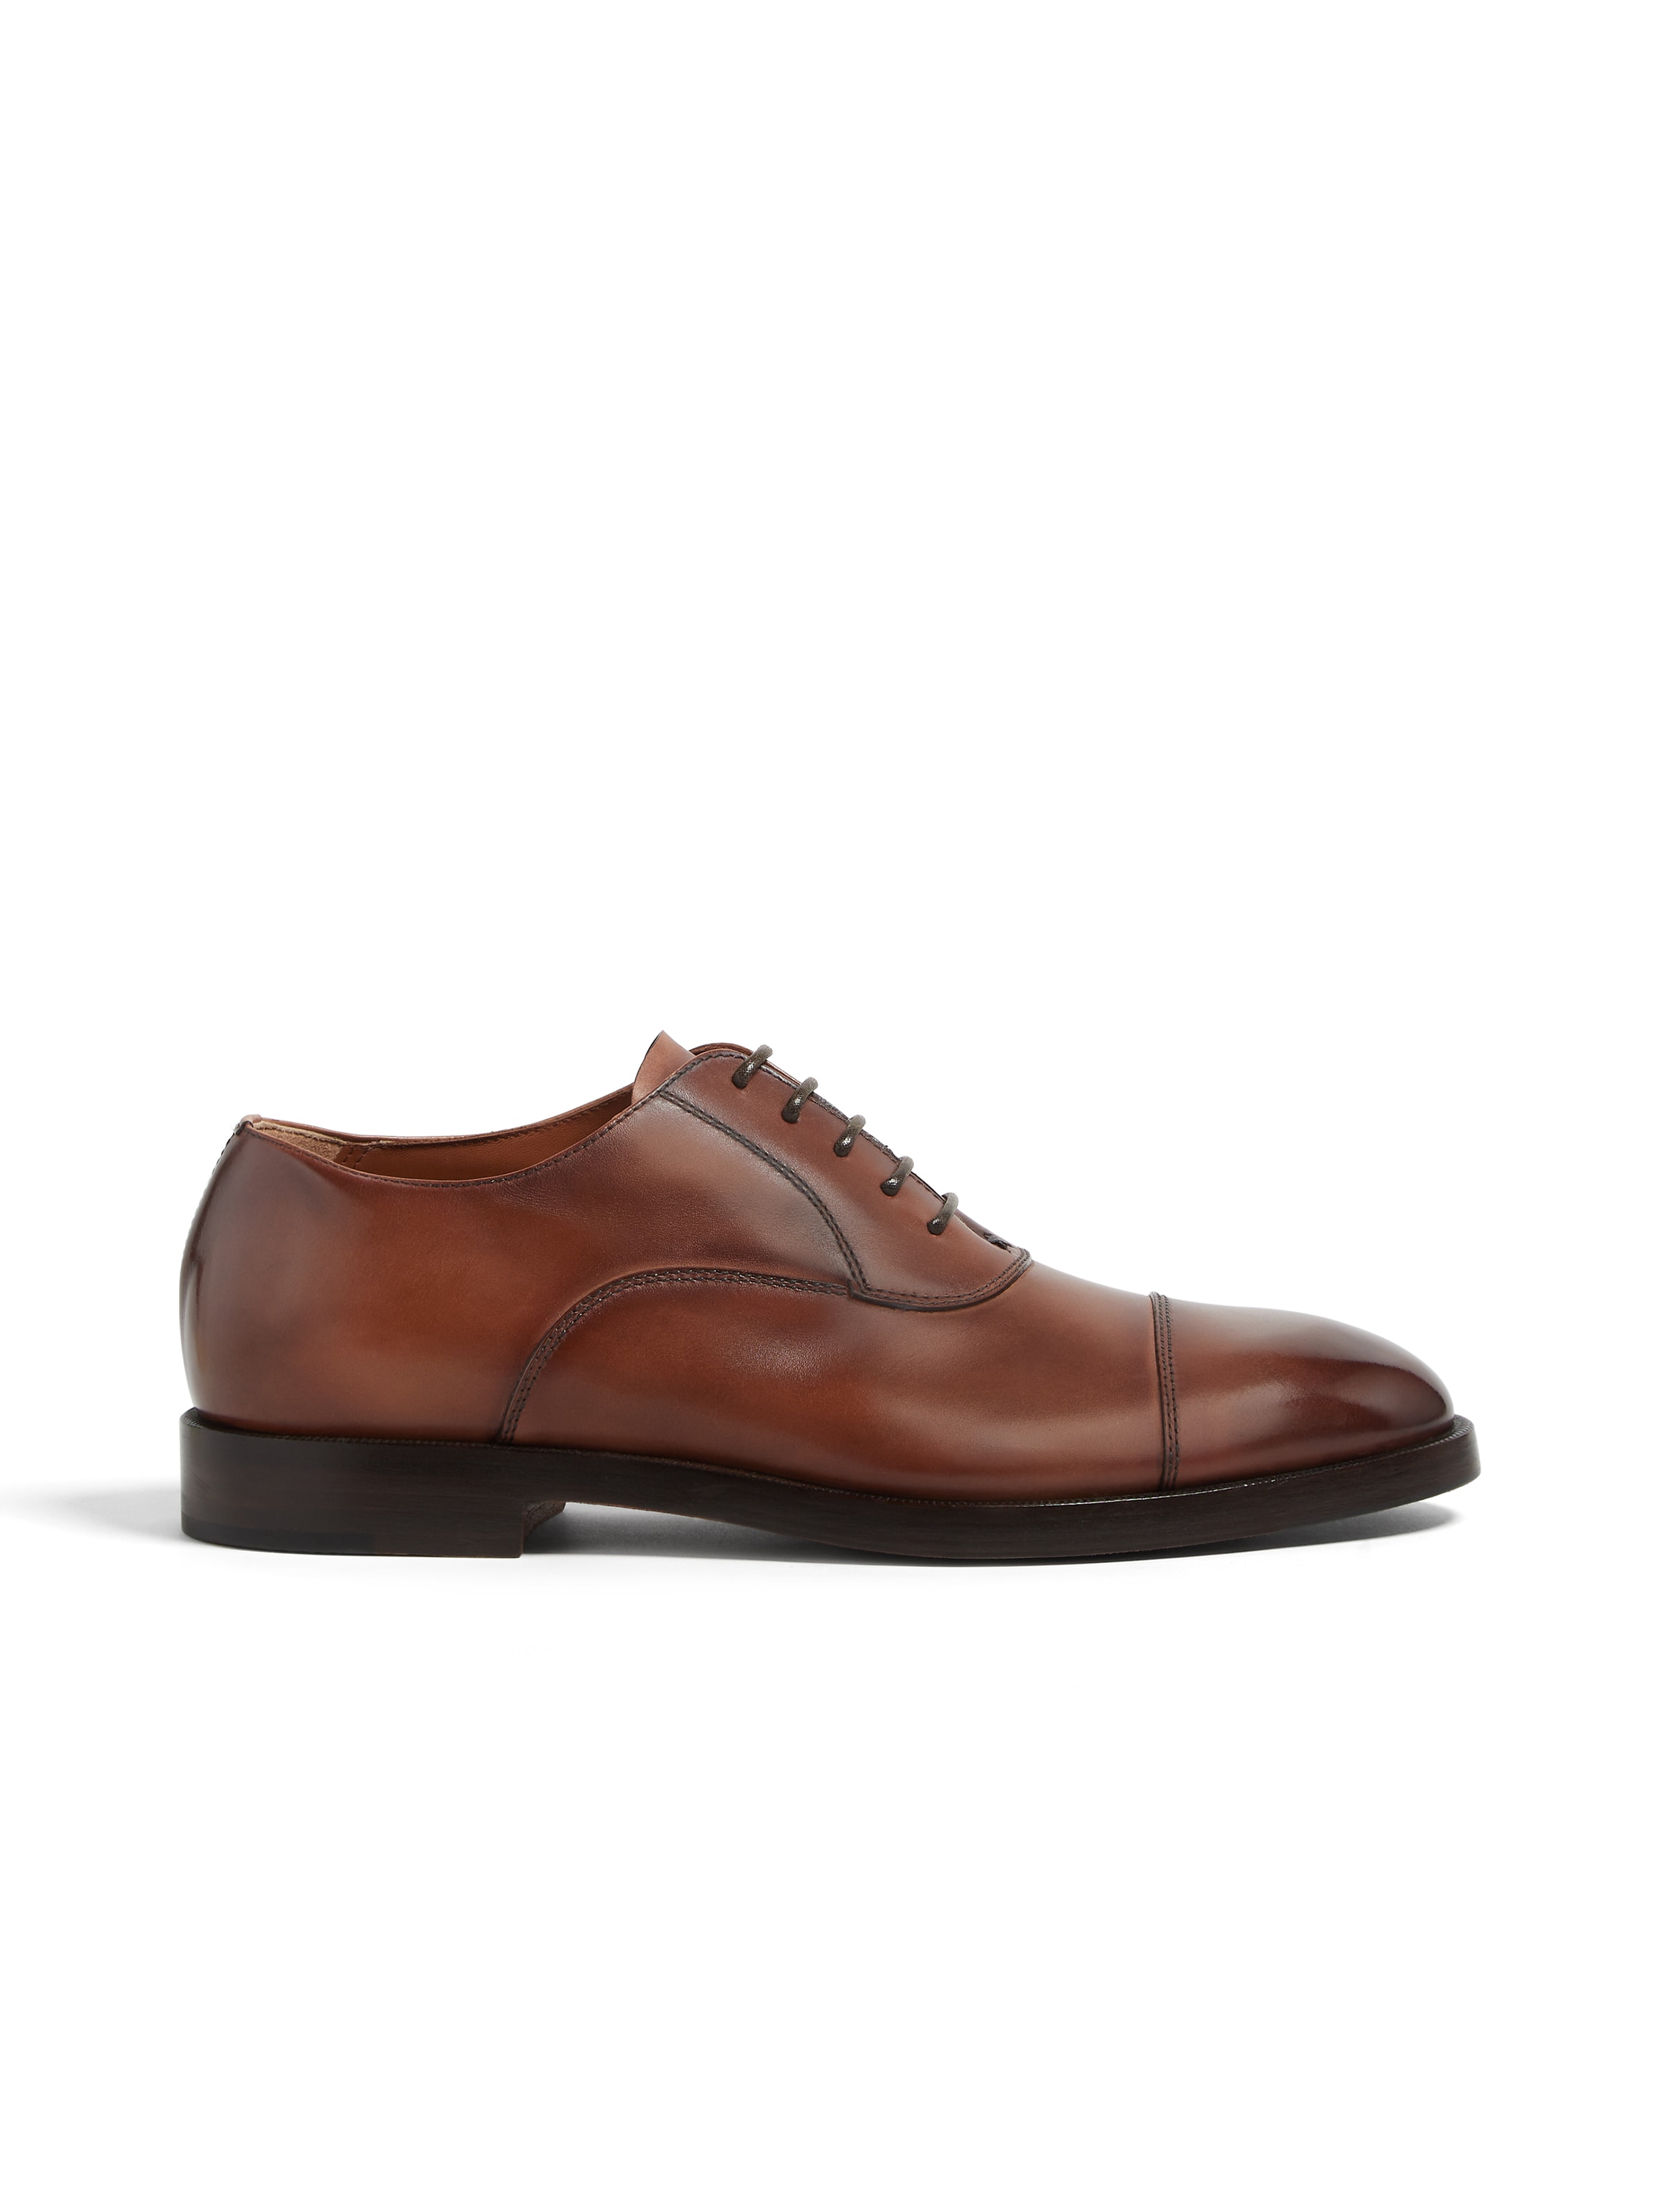 Zegna Light Brown Leather Torino Oxford Shoes